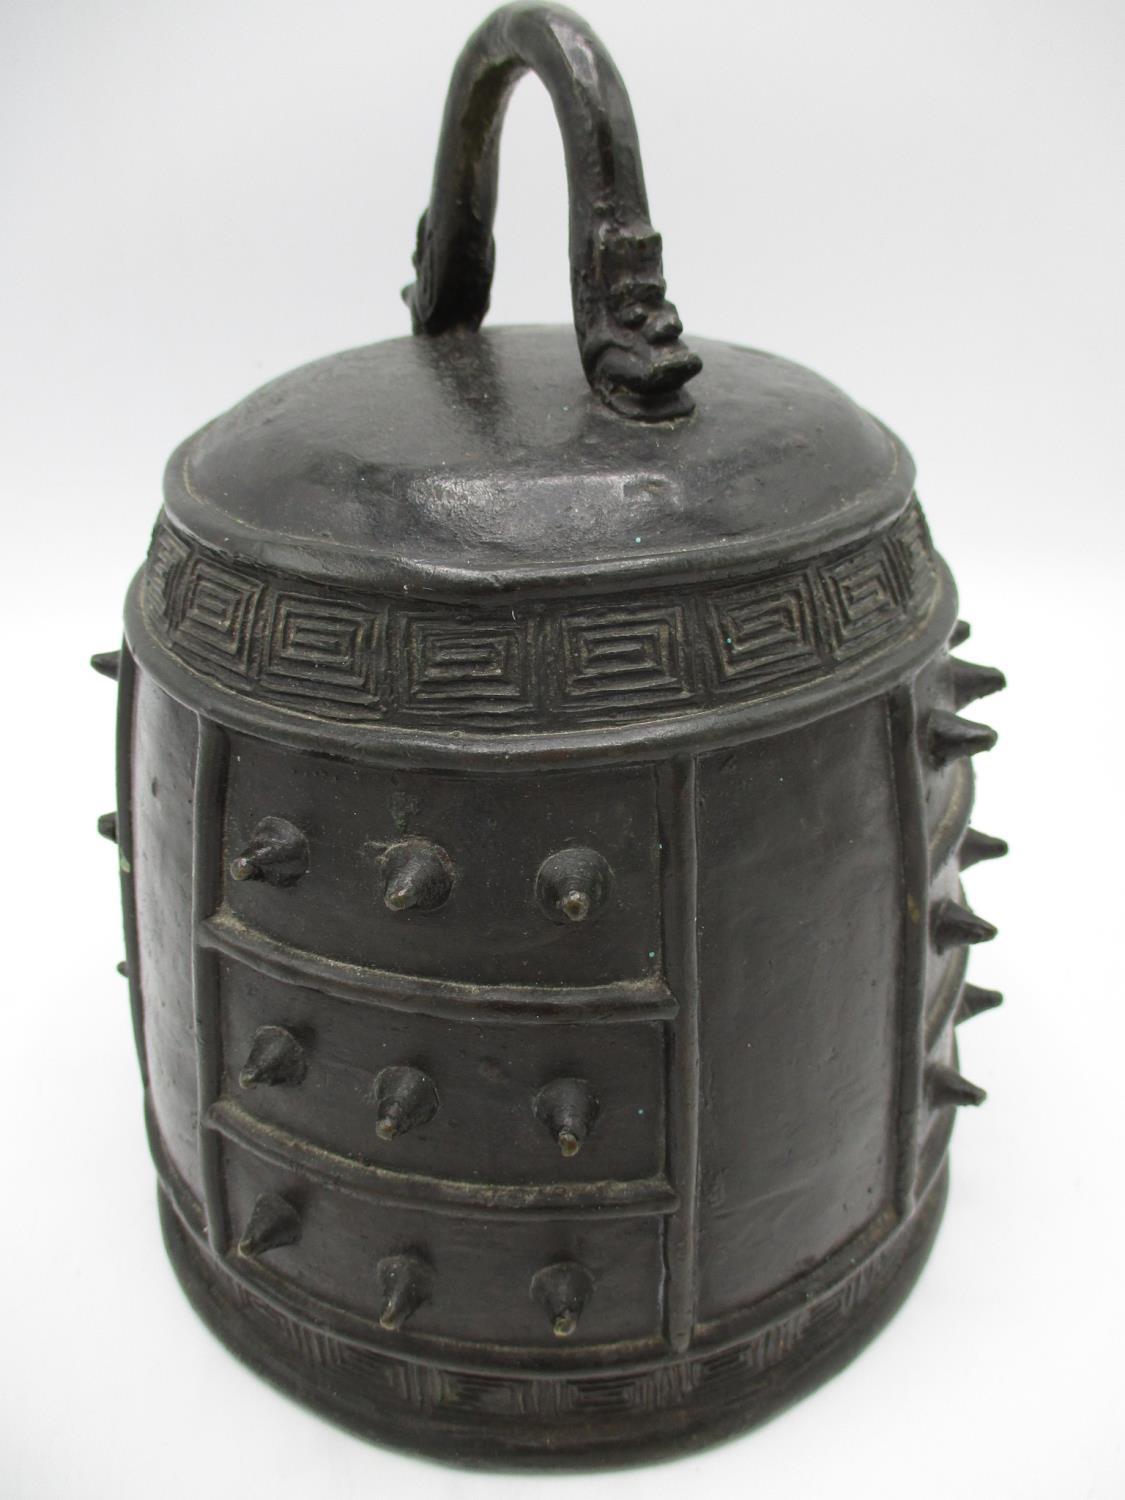 A Qing Dynasty Chinese bronze Bianzhong or chime bell with a twin mask handle, panels of